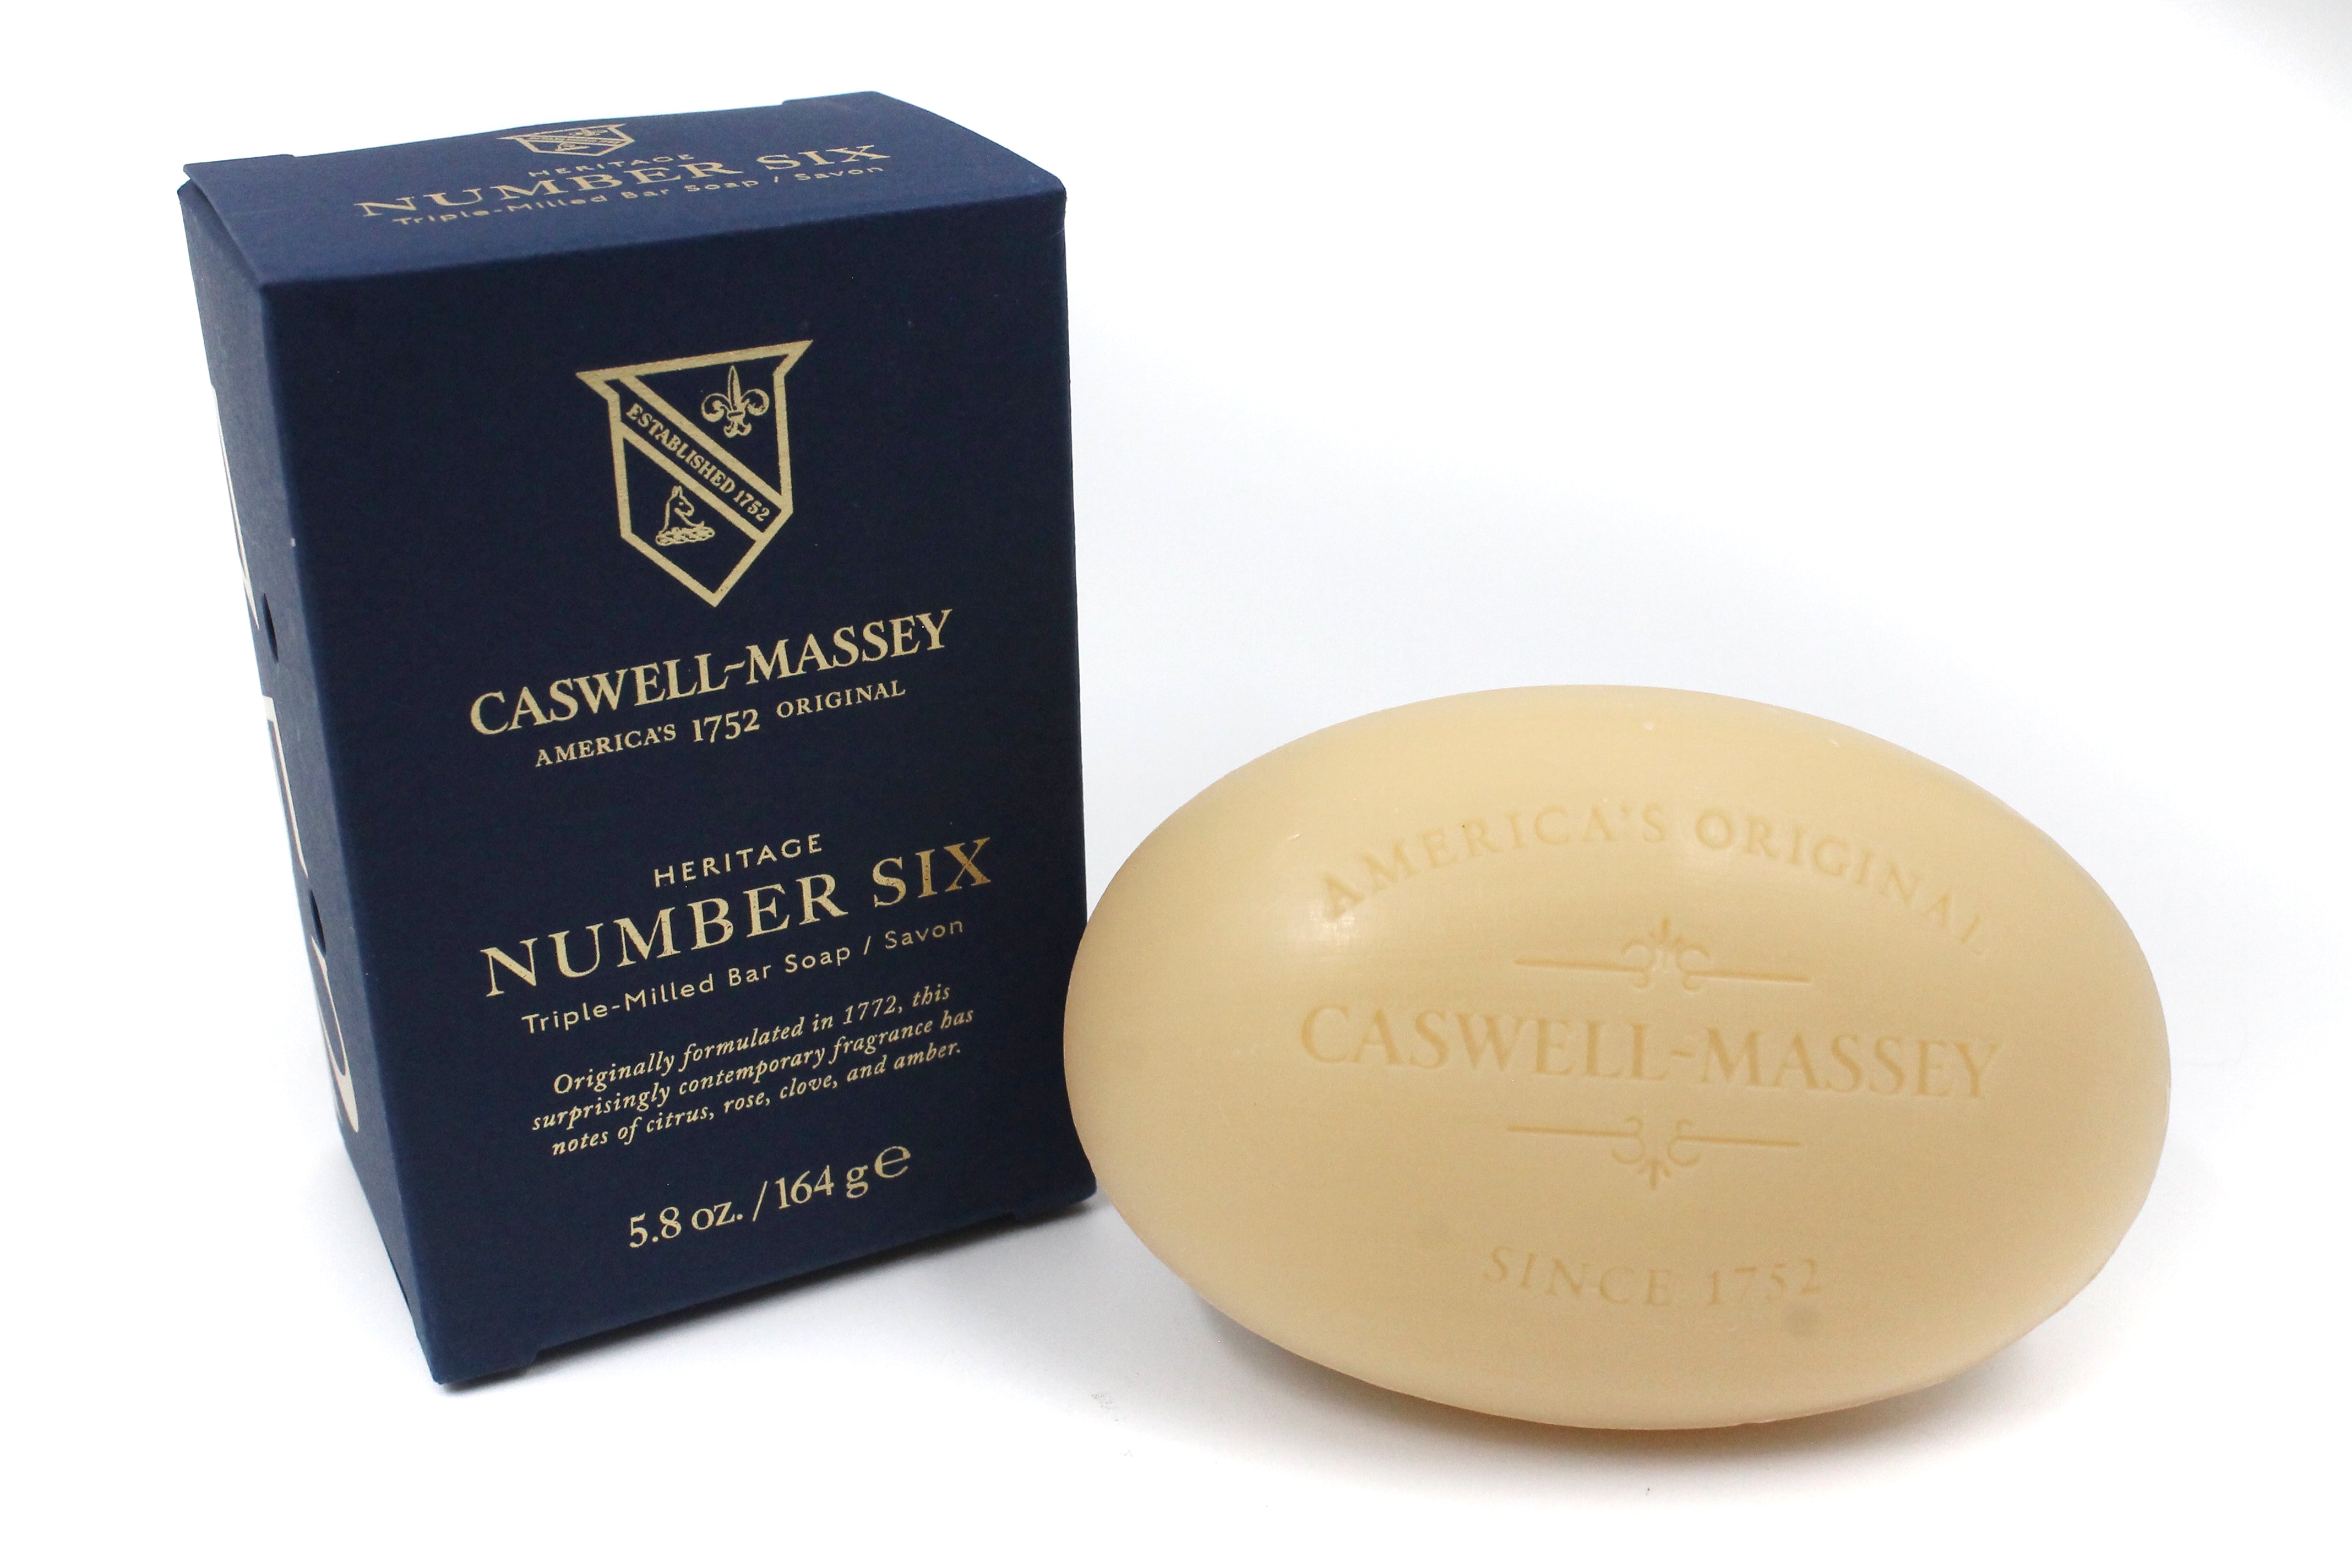 Caswell Massey Number Six Bar Soap